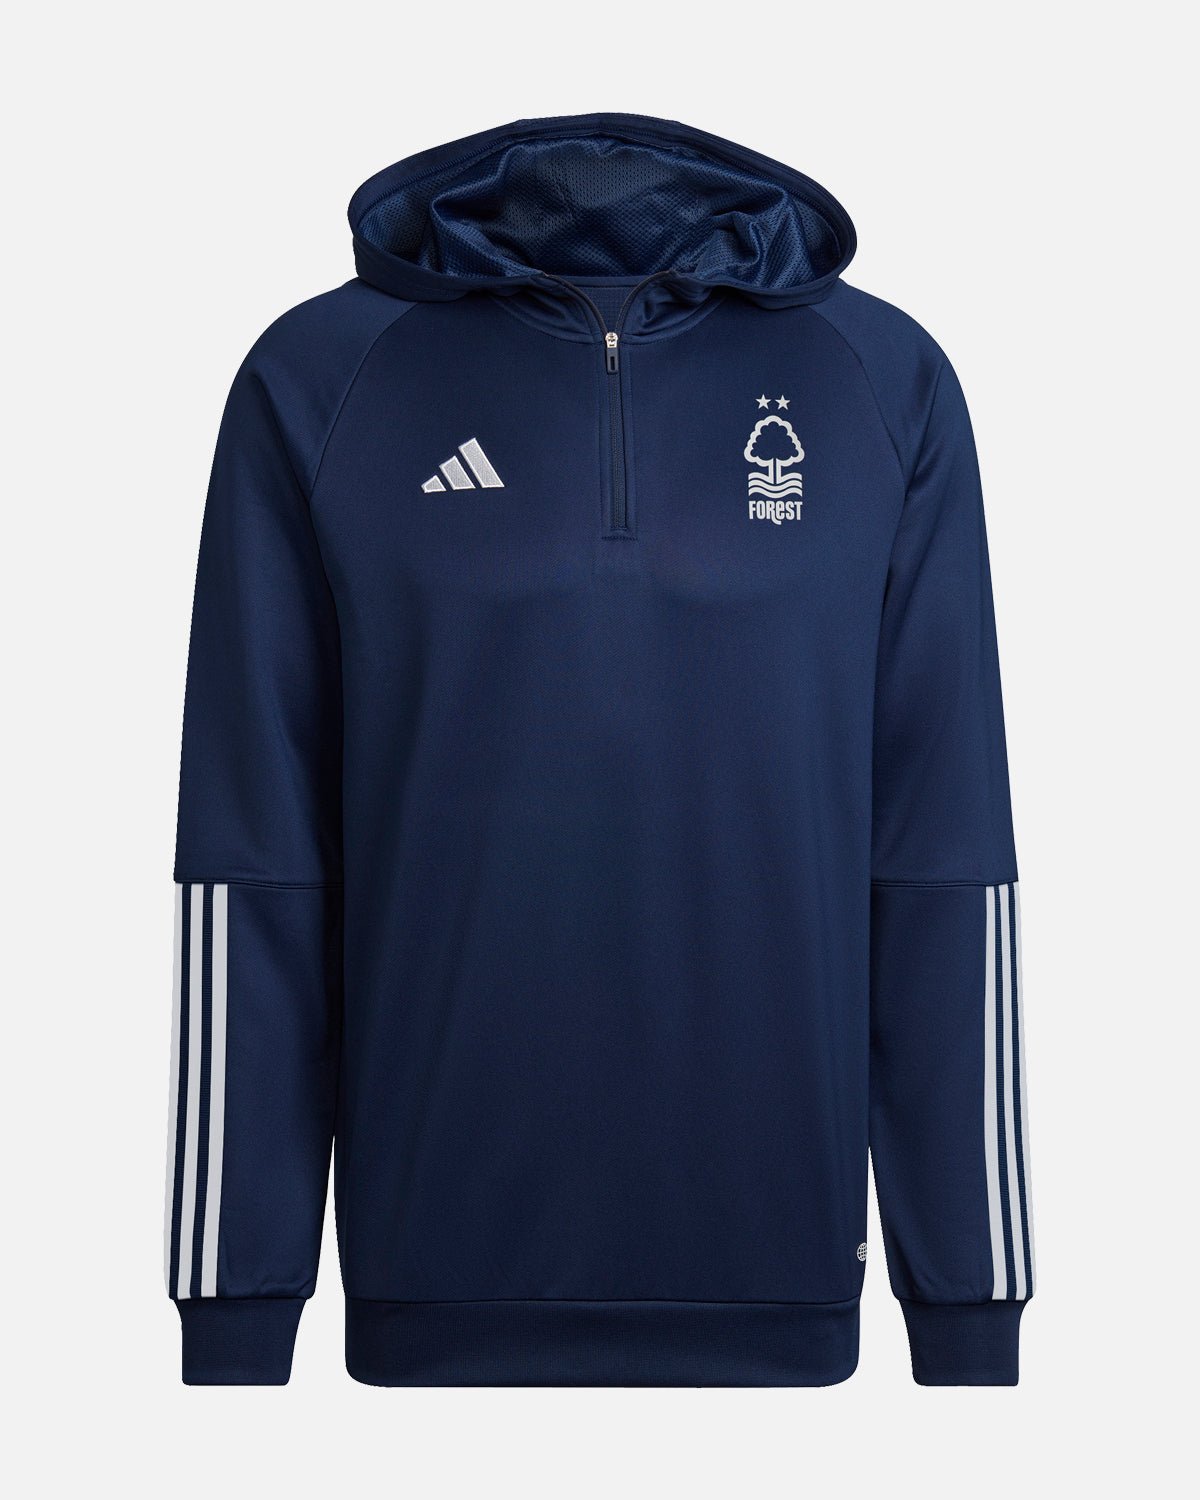 NFFC Navy Travel Hoodie 23-24 - Nottingham Forest FC